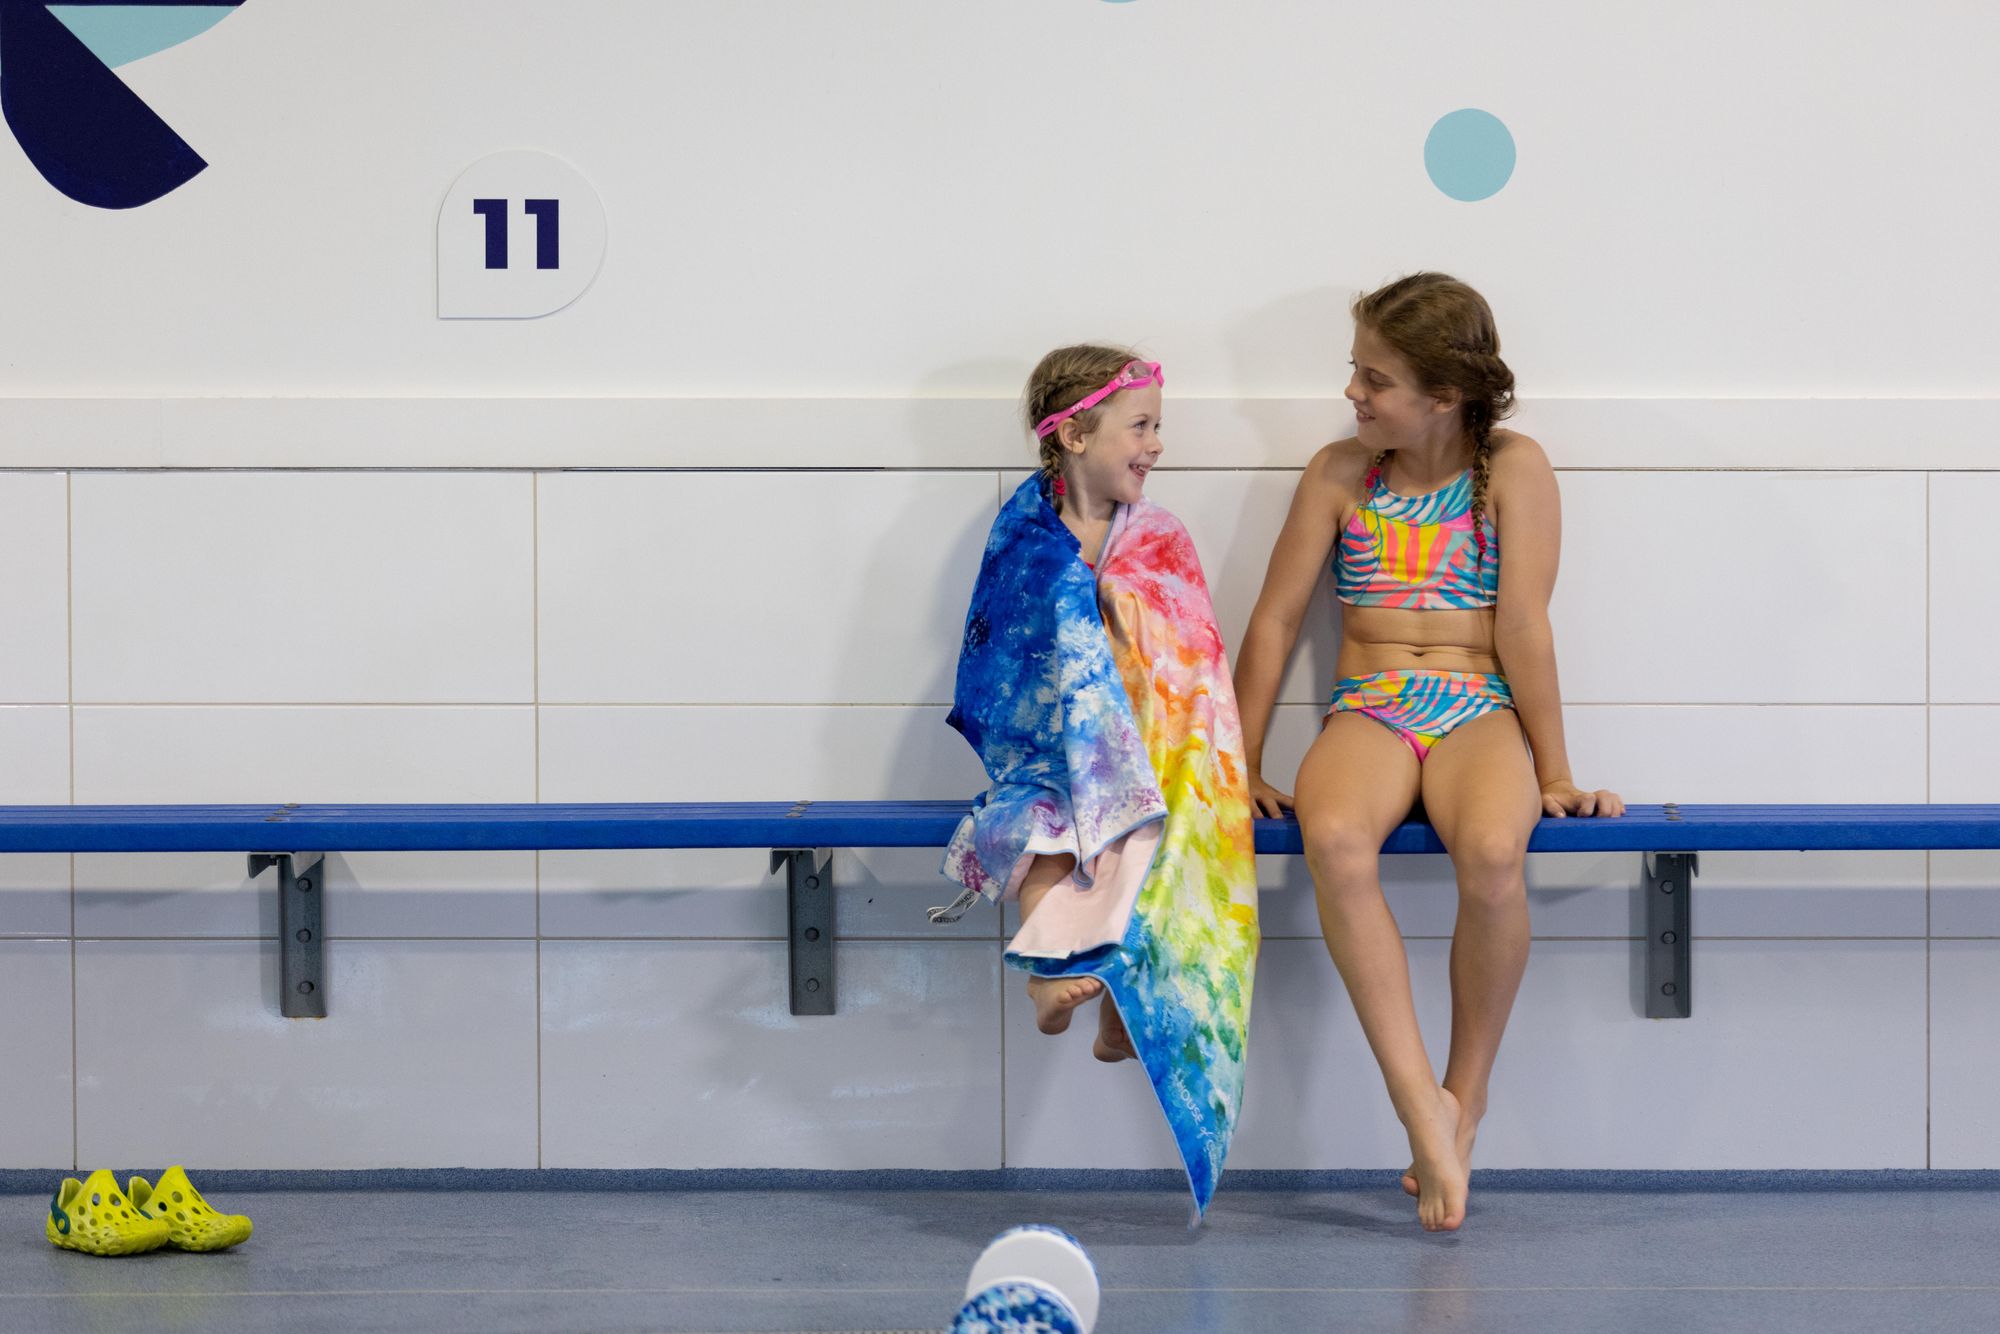 Find out what type of swim essentials your child prefers best!